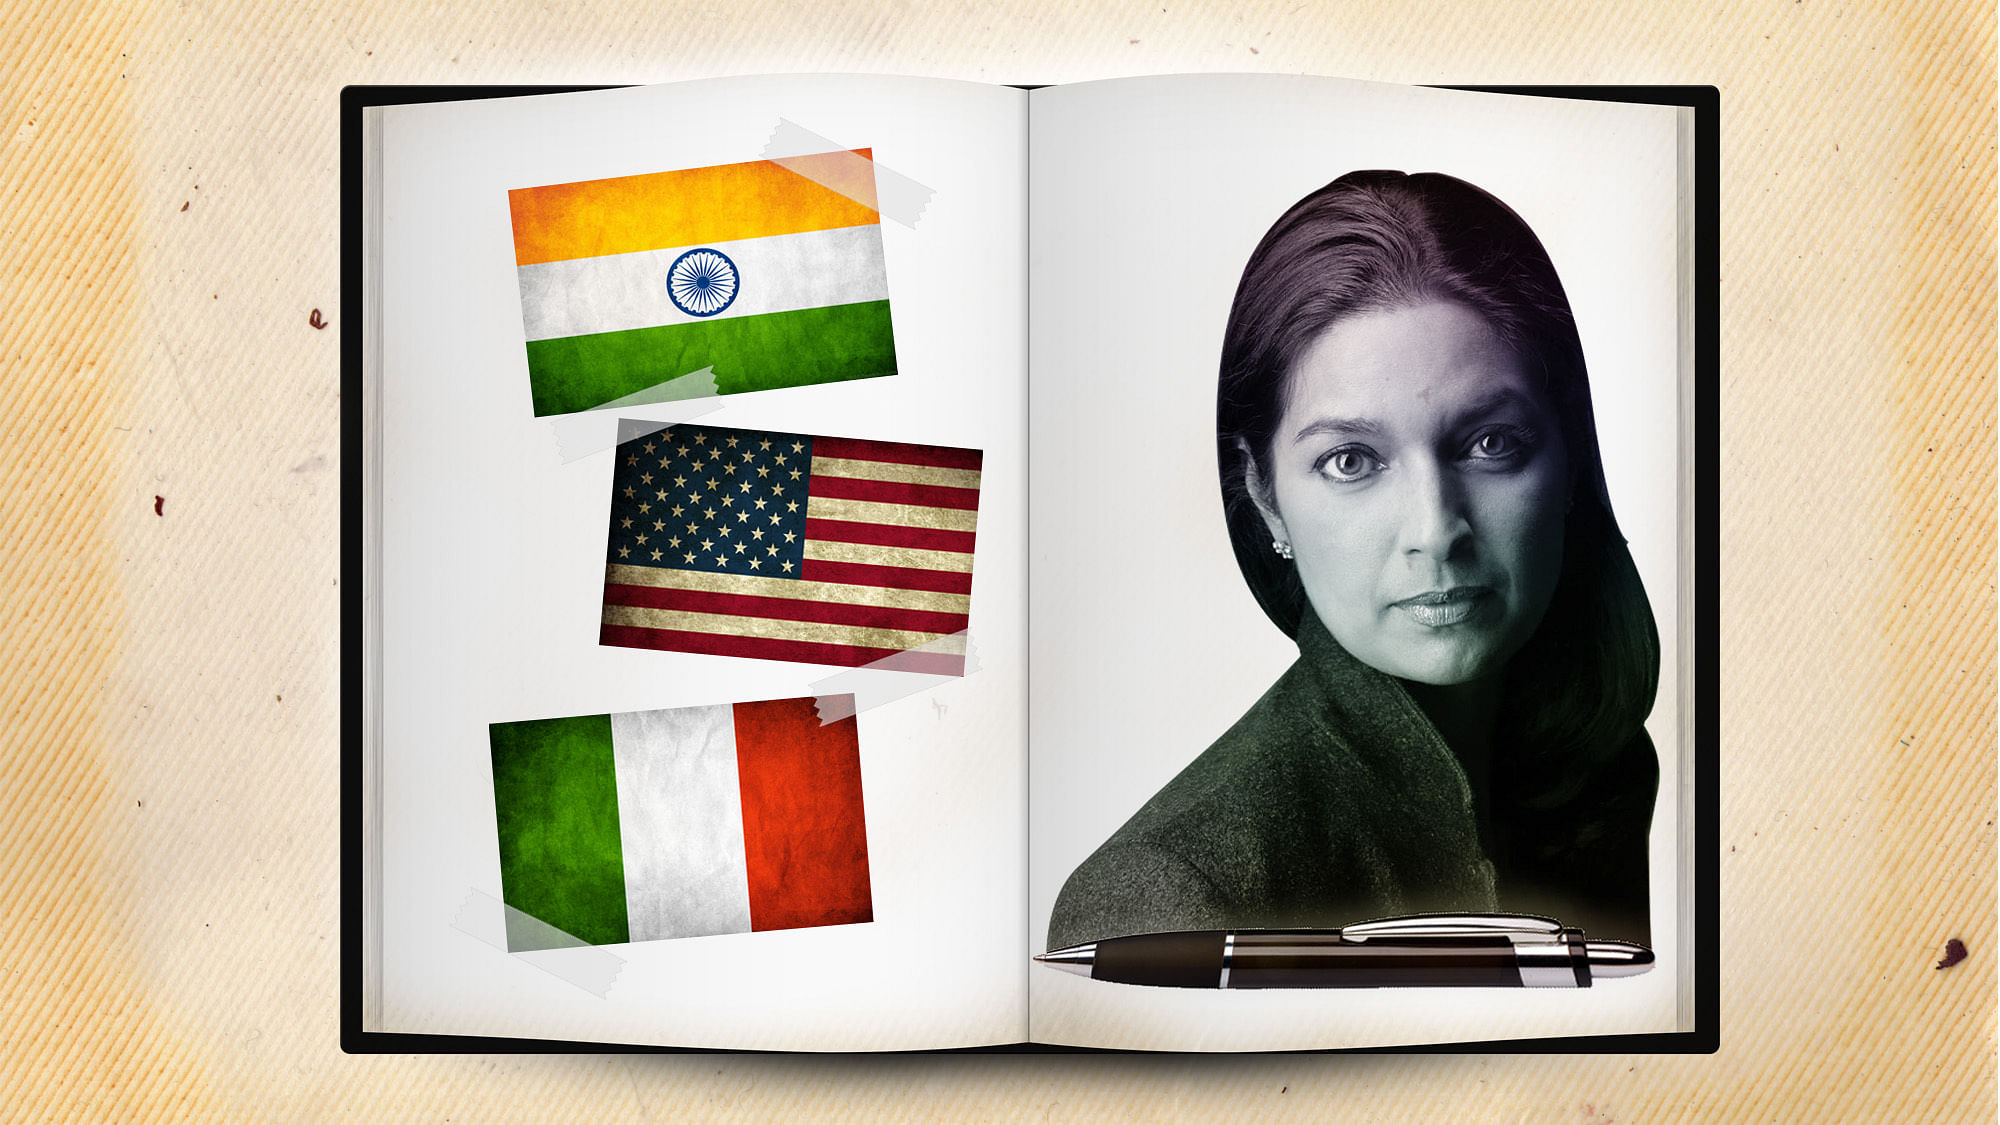 Bravo Jhumpa Lahiri, you just showed us how to stop fearing language! (Photo: <b>The Quint</b>)